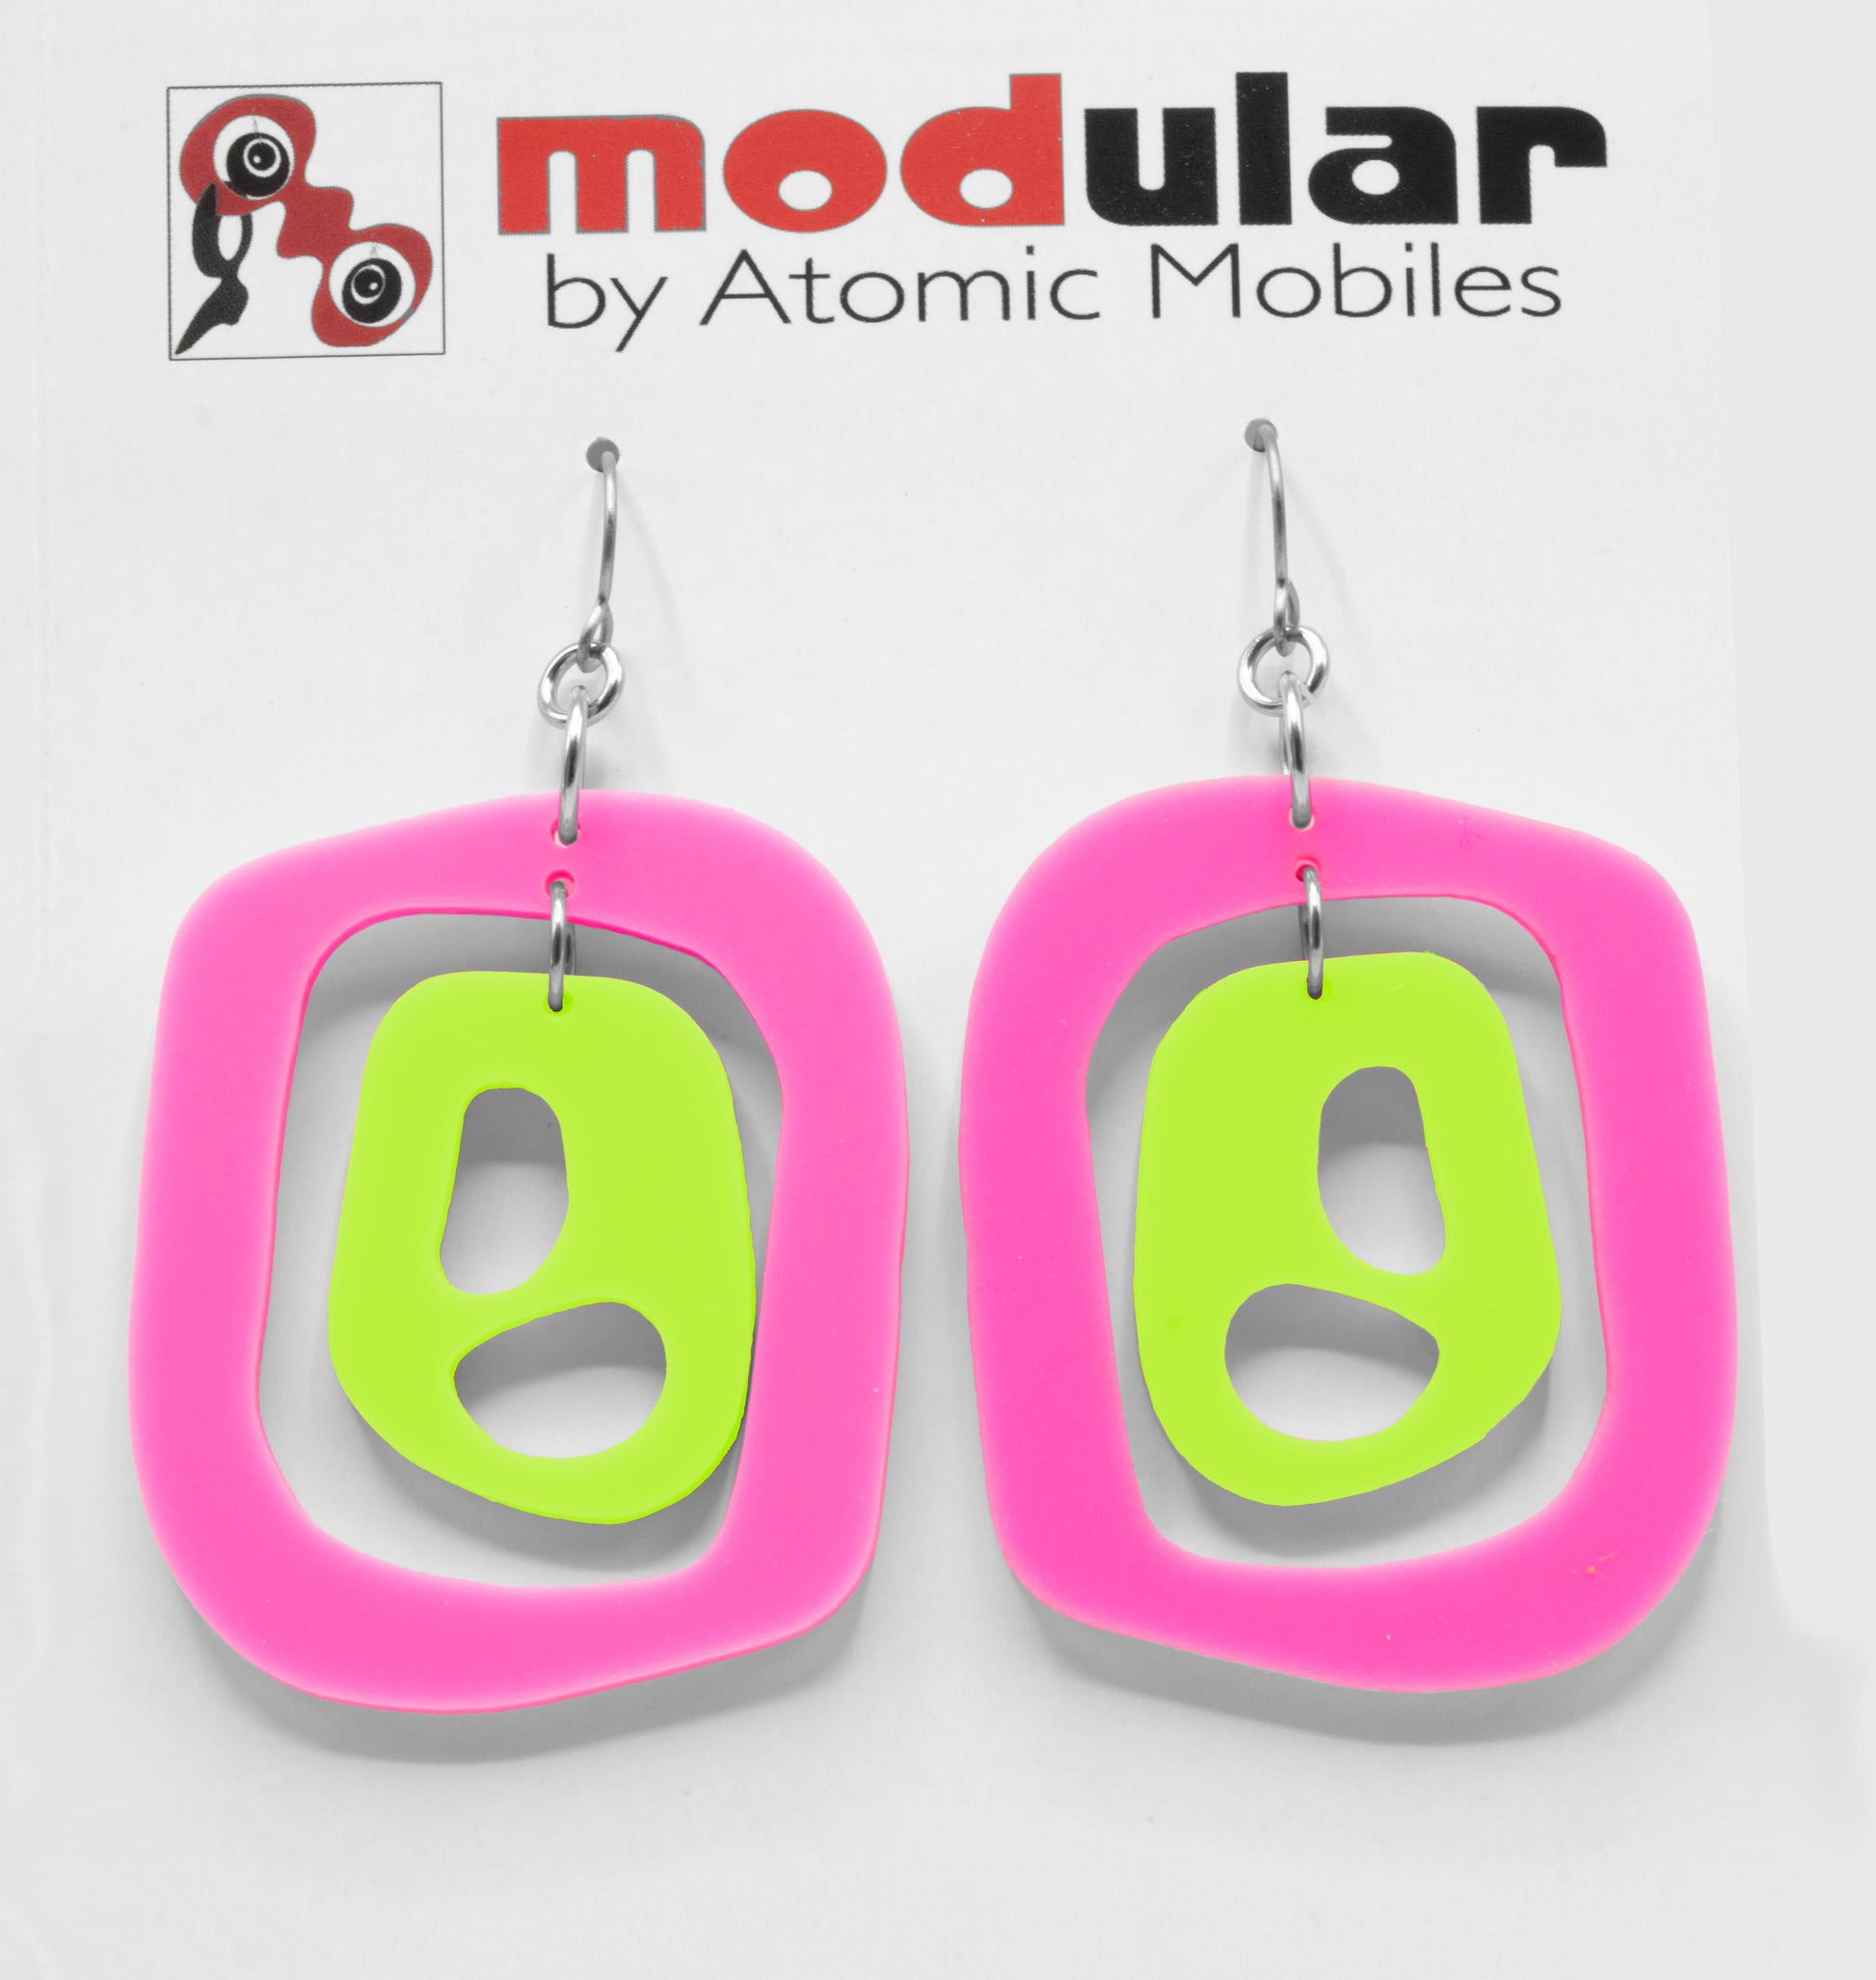 MODular Earrings - Mid 20th Statement Earrings in Hot Pink and Lime by AtomicMobiles.com - retro era mod handmade jewelry